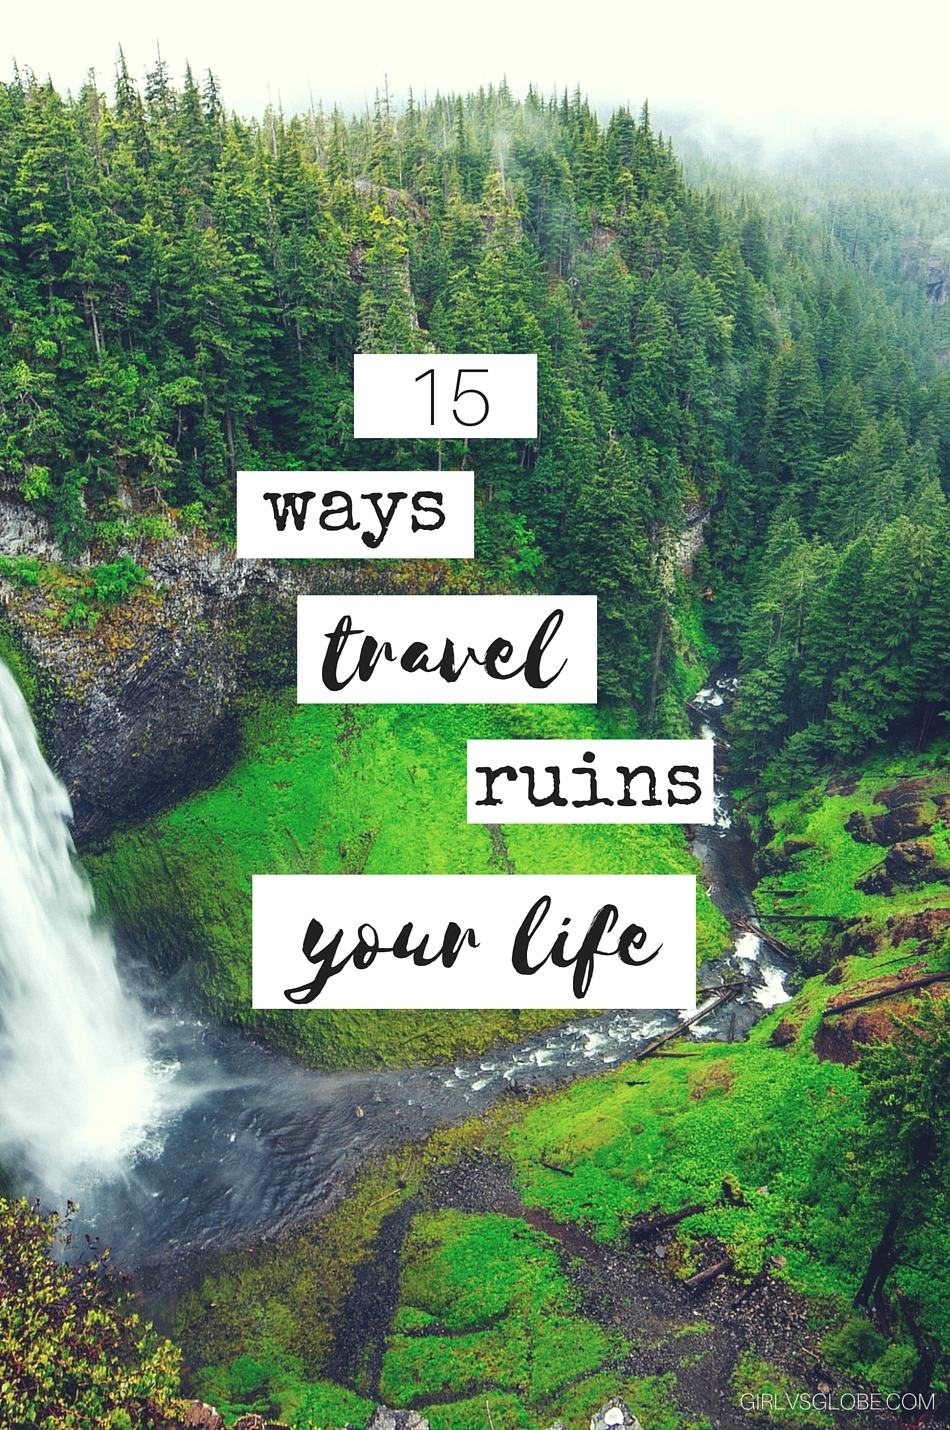 ways travel ruins your life